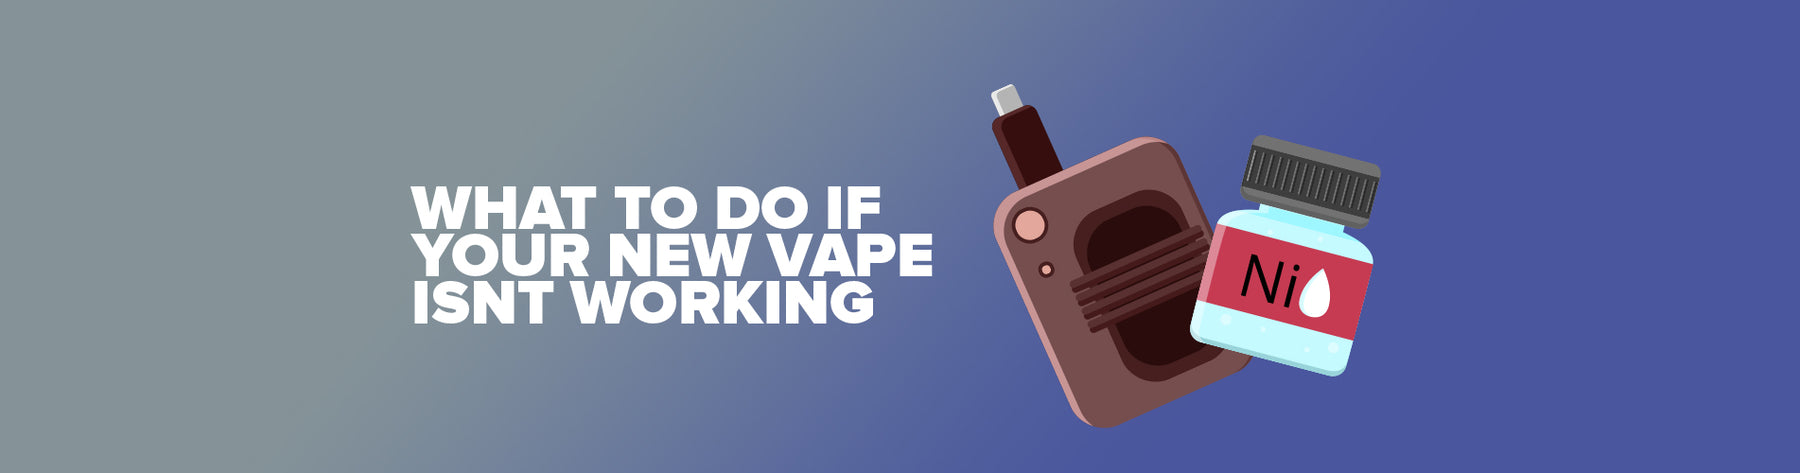 What To Do If Your New Vape Isn't Working